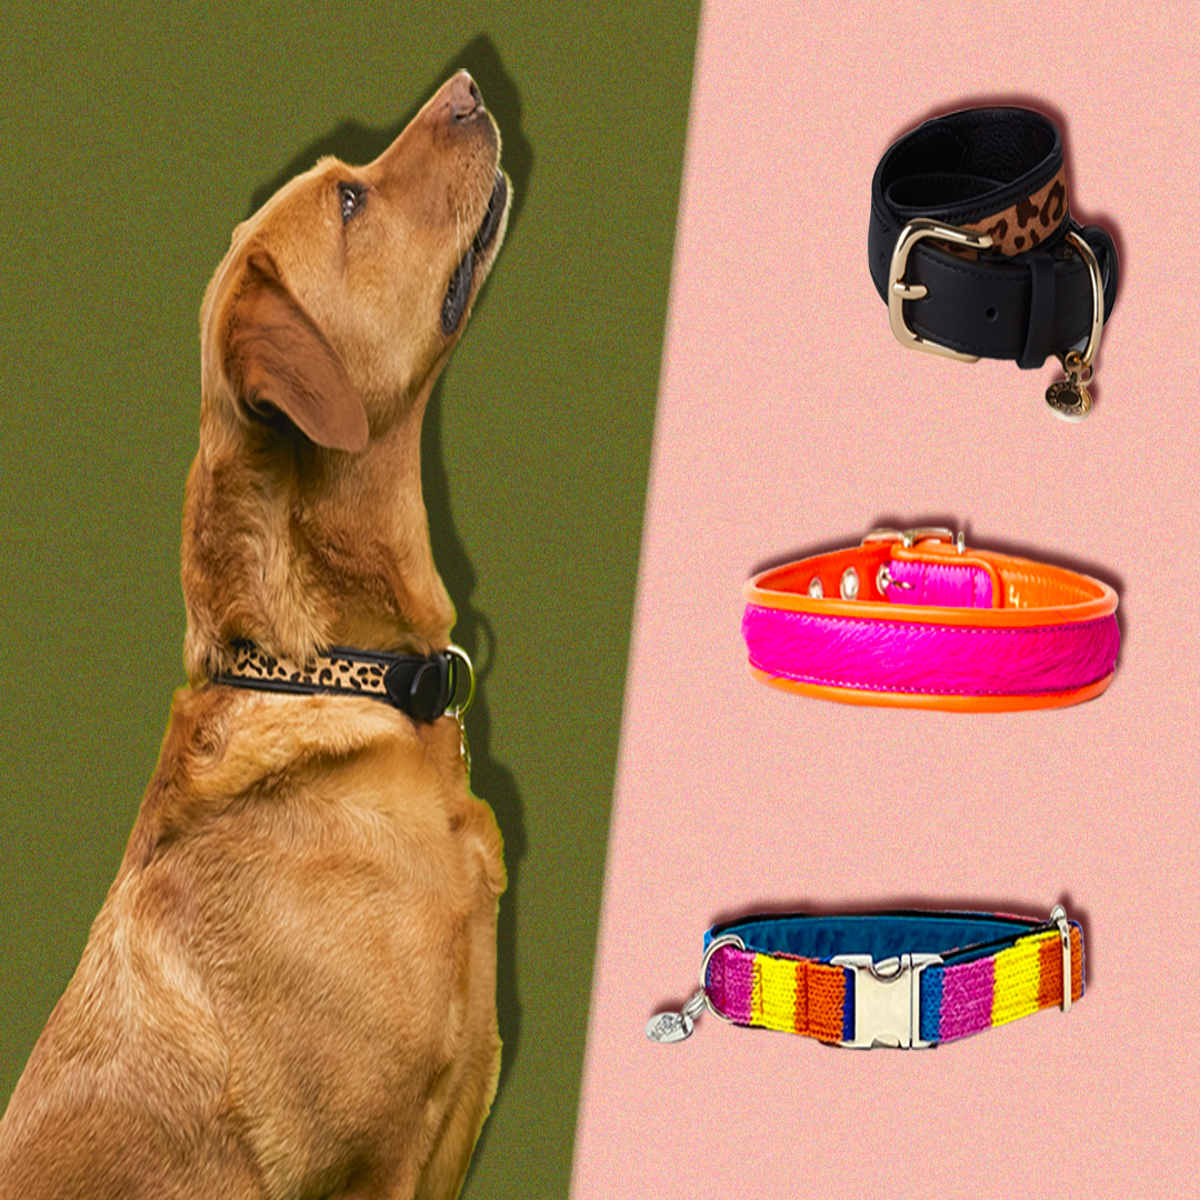 Luxury Leather Designer Dog Collar In XS, S, M, L, XL (Optional Leash  Available)